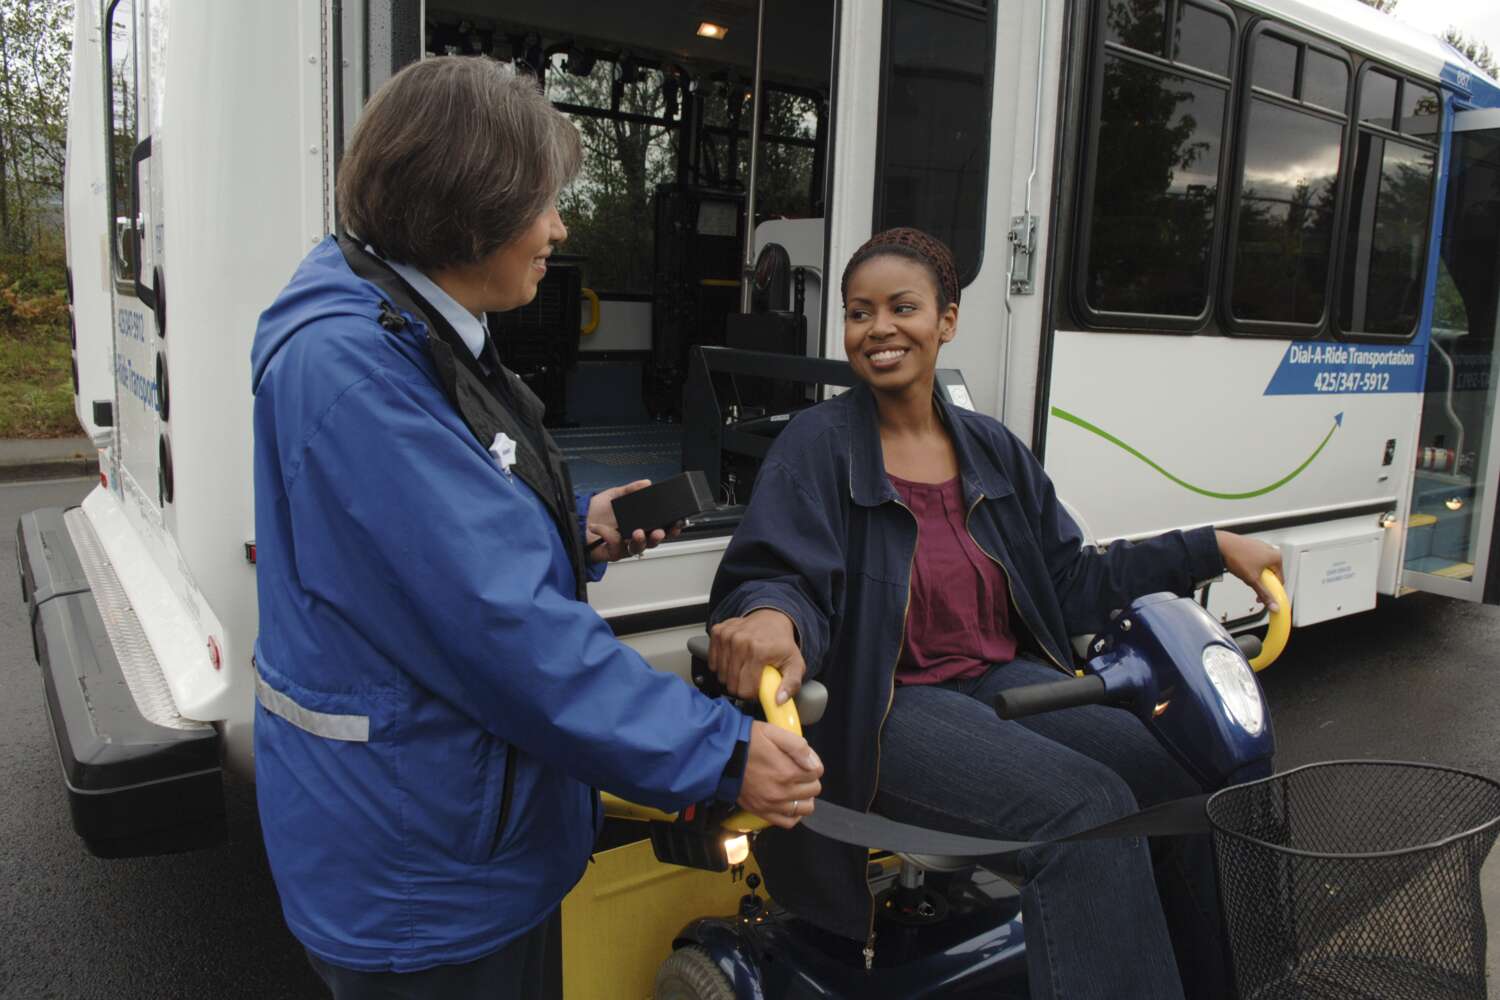 Getting onto a Community Transit but in a wheelchair